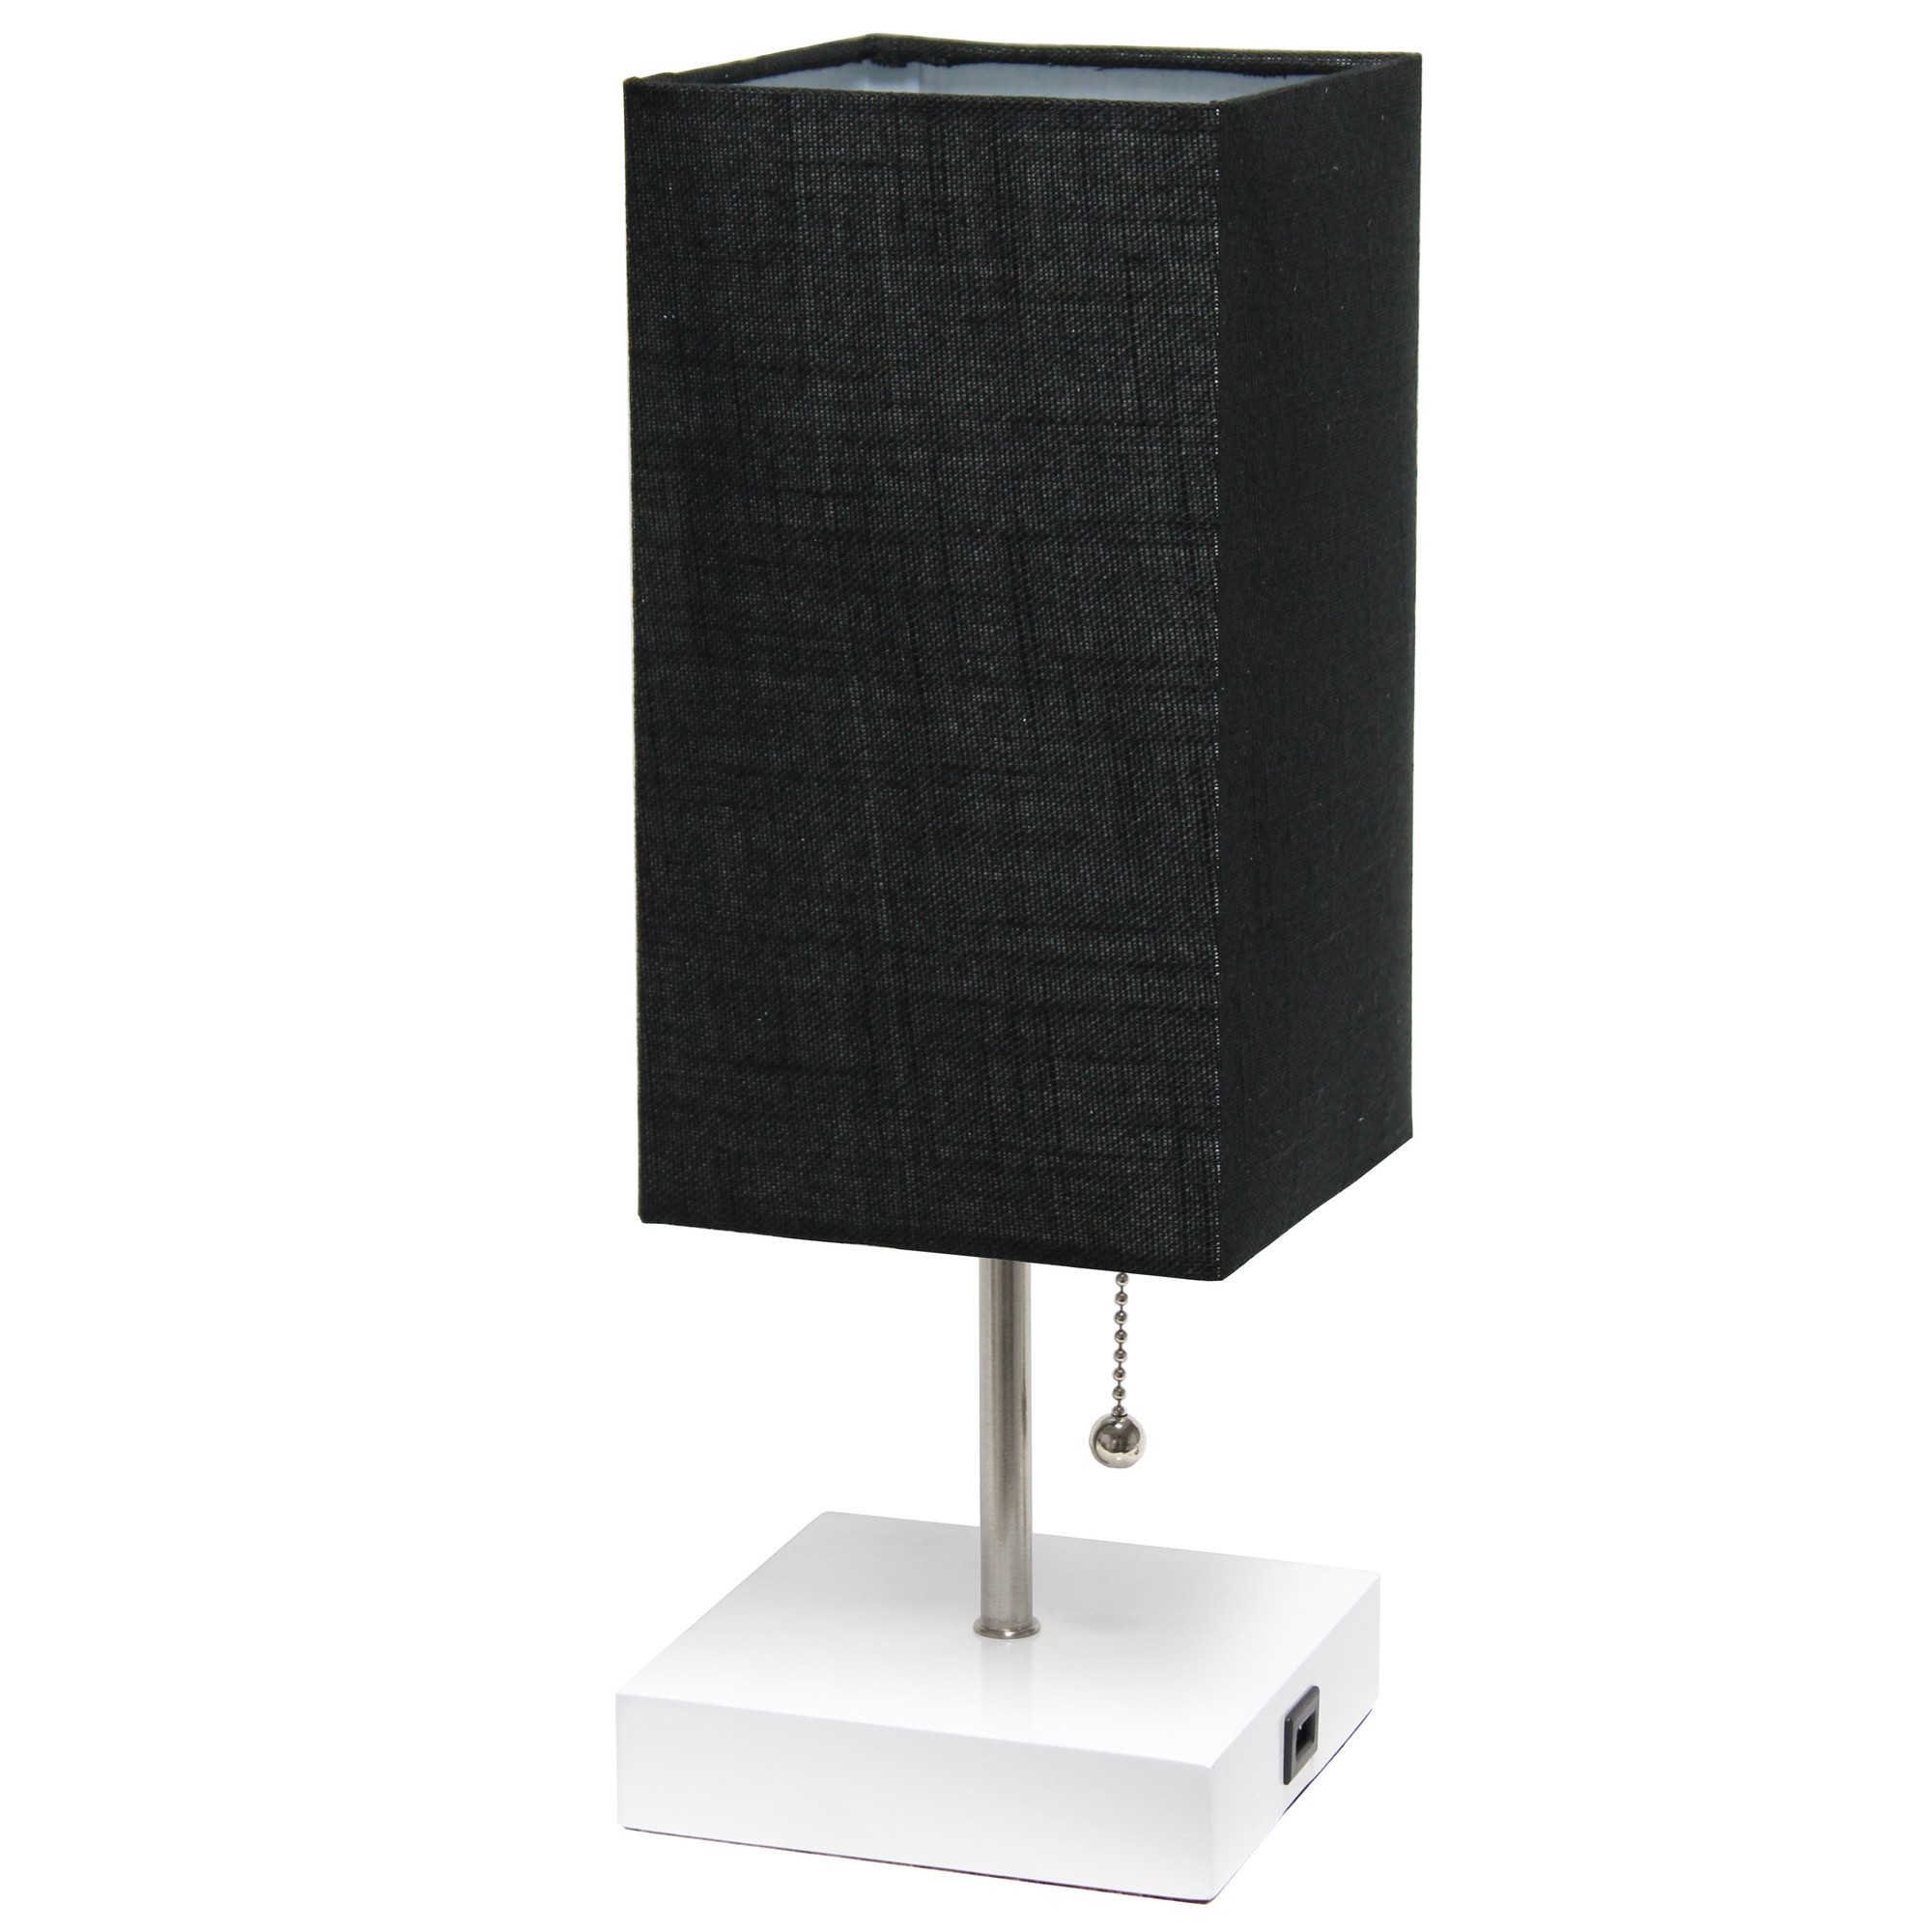 Simple Designs Petite White Stick Lamp with USB Charging Port and Fabric Shade, Black